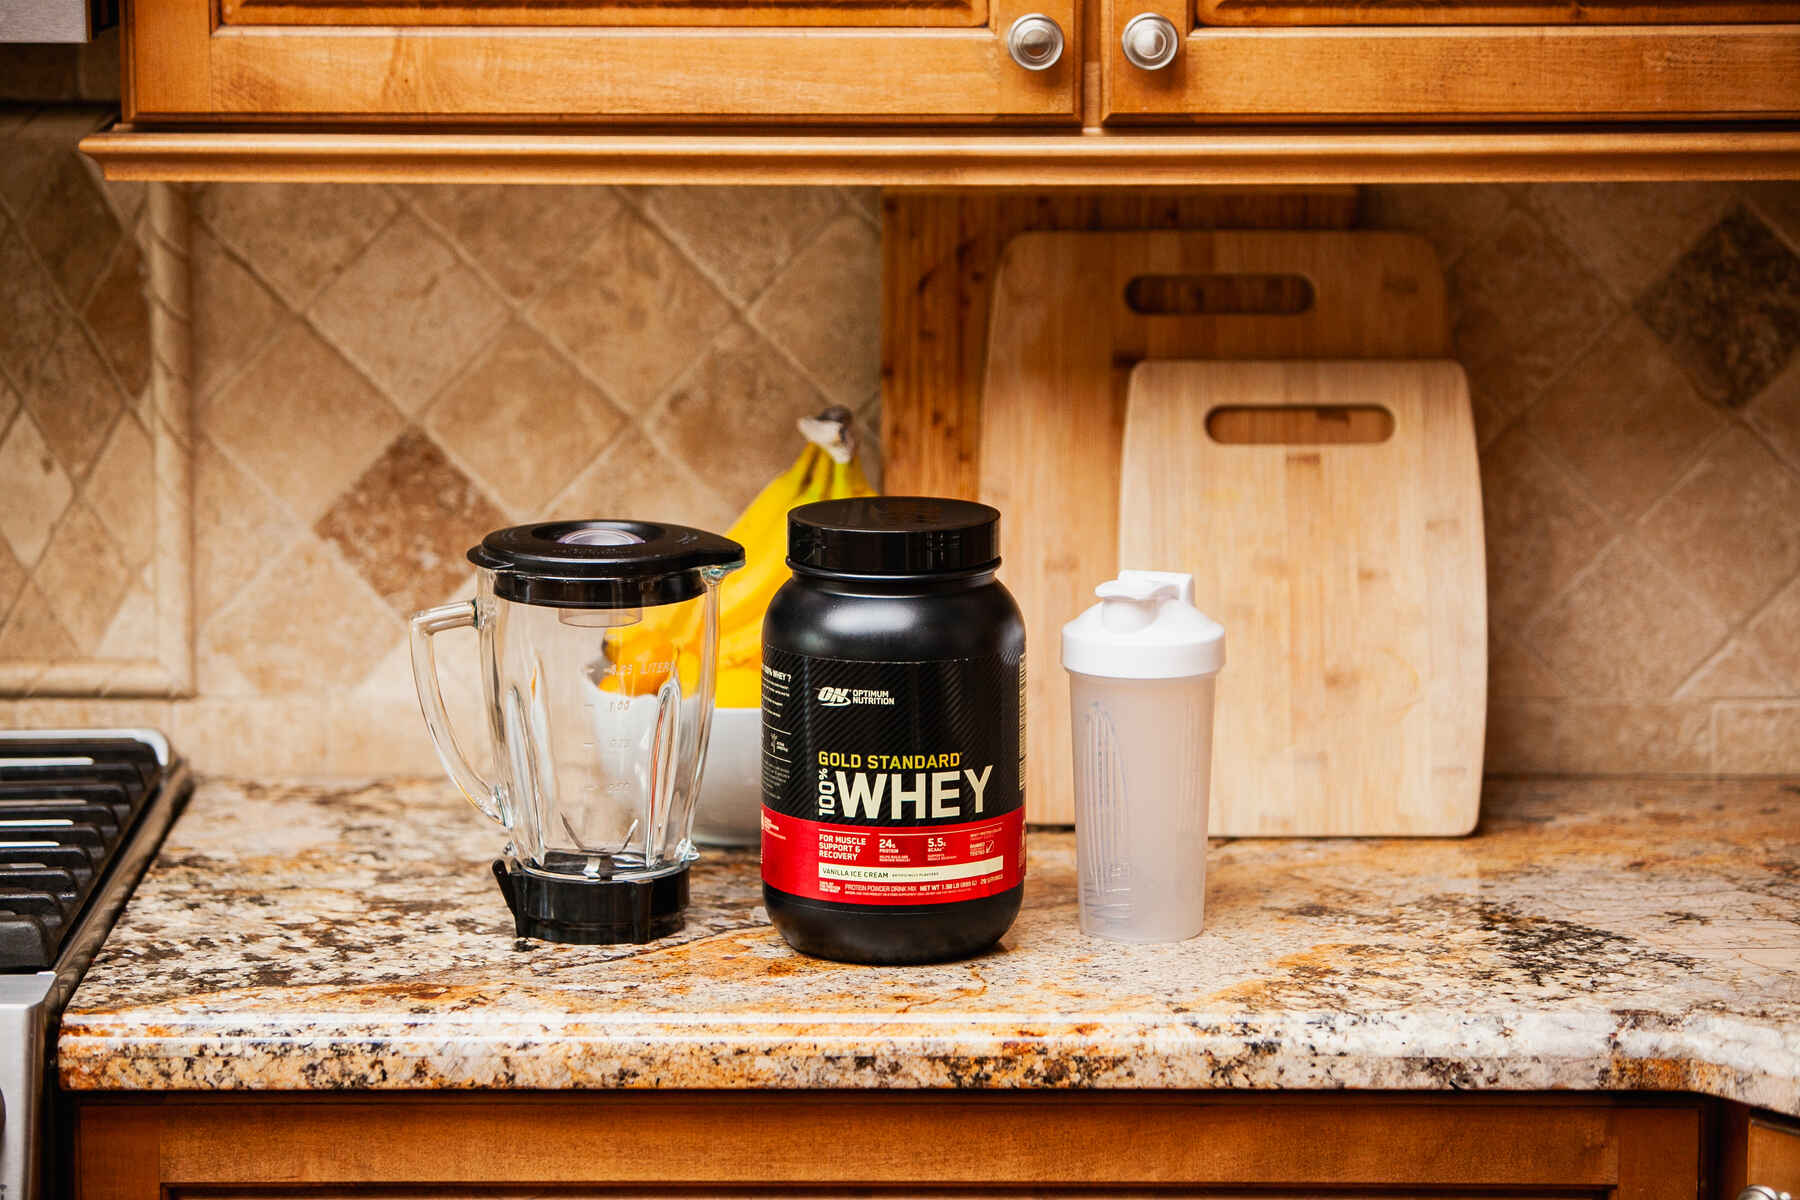 A kitchen counter with a blender, protein powder jar, and a shaker bottle, with wooden cabinets in the background